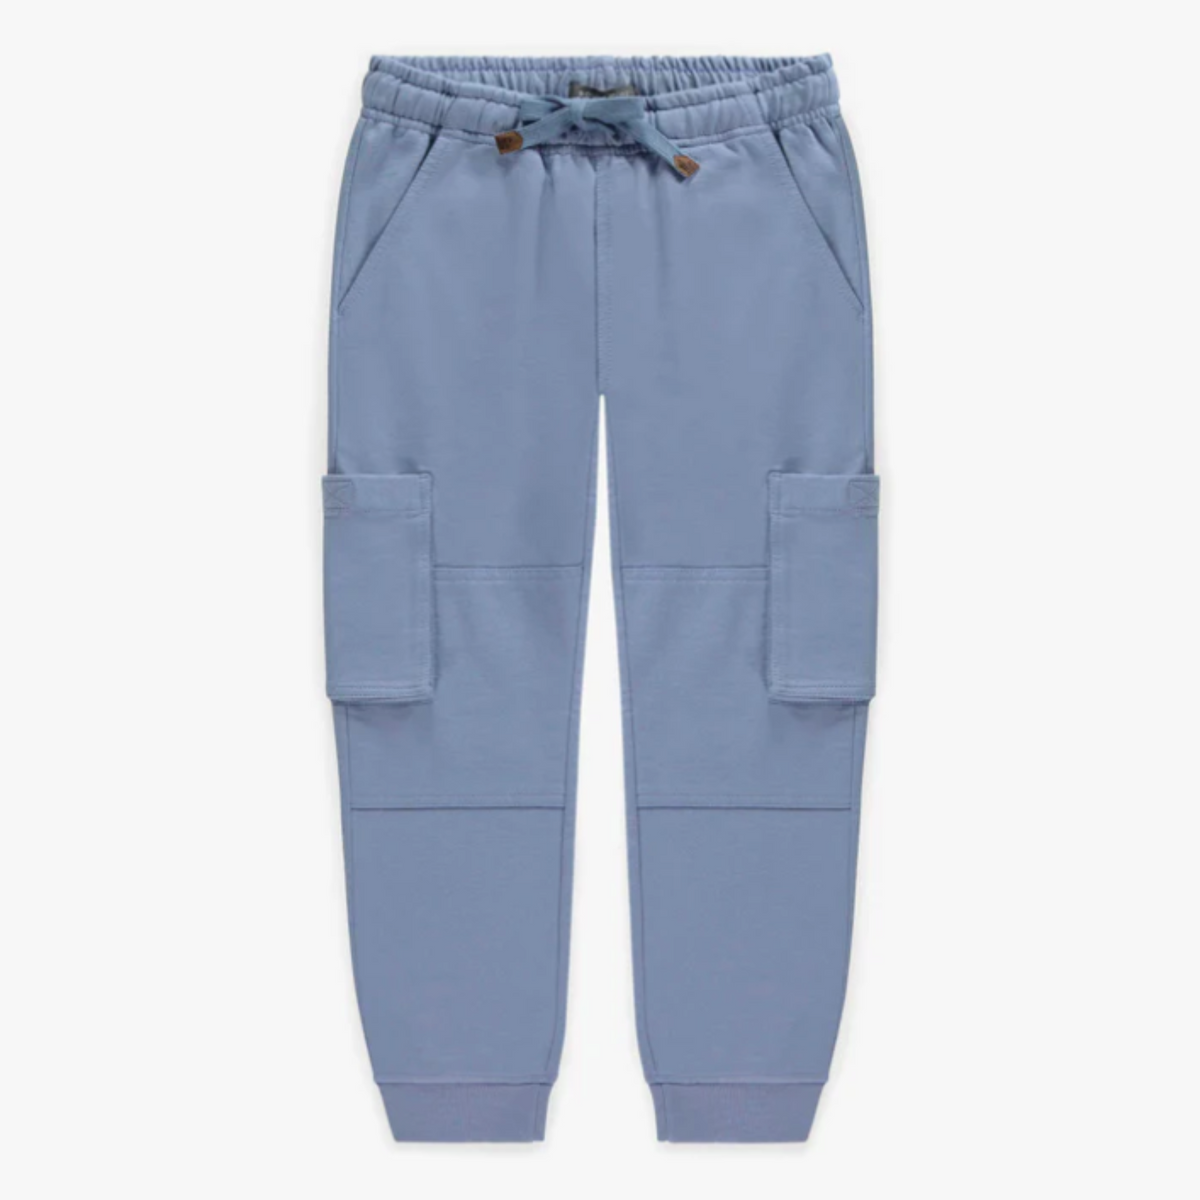 Blue Pants Relaxed Fit in French Terry, Child